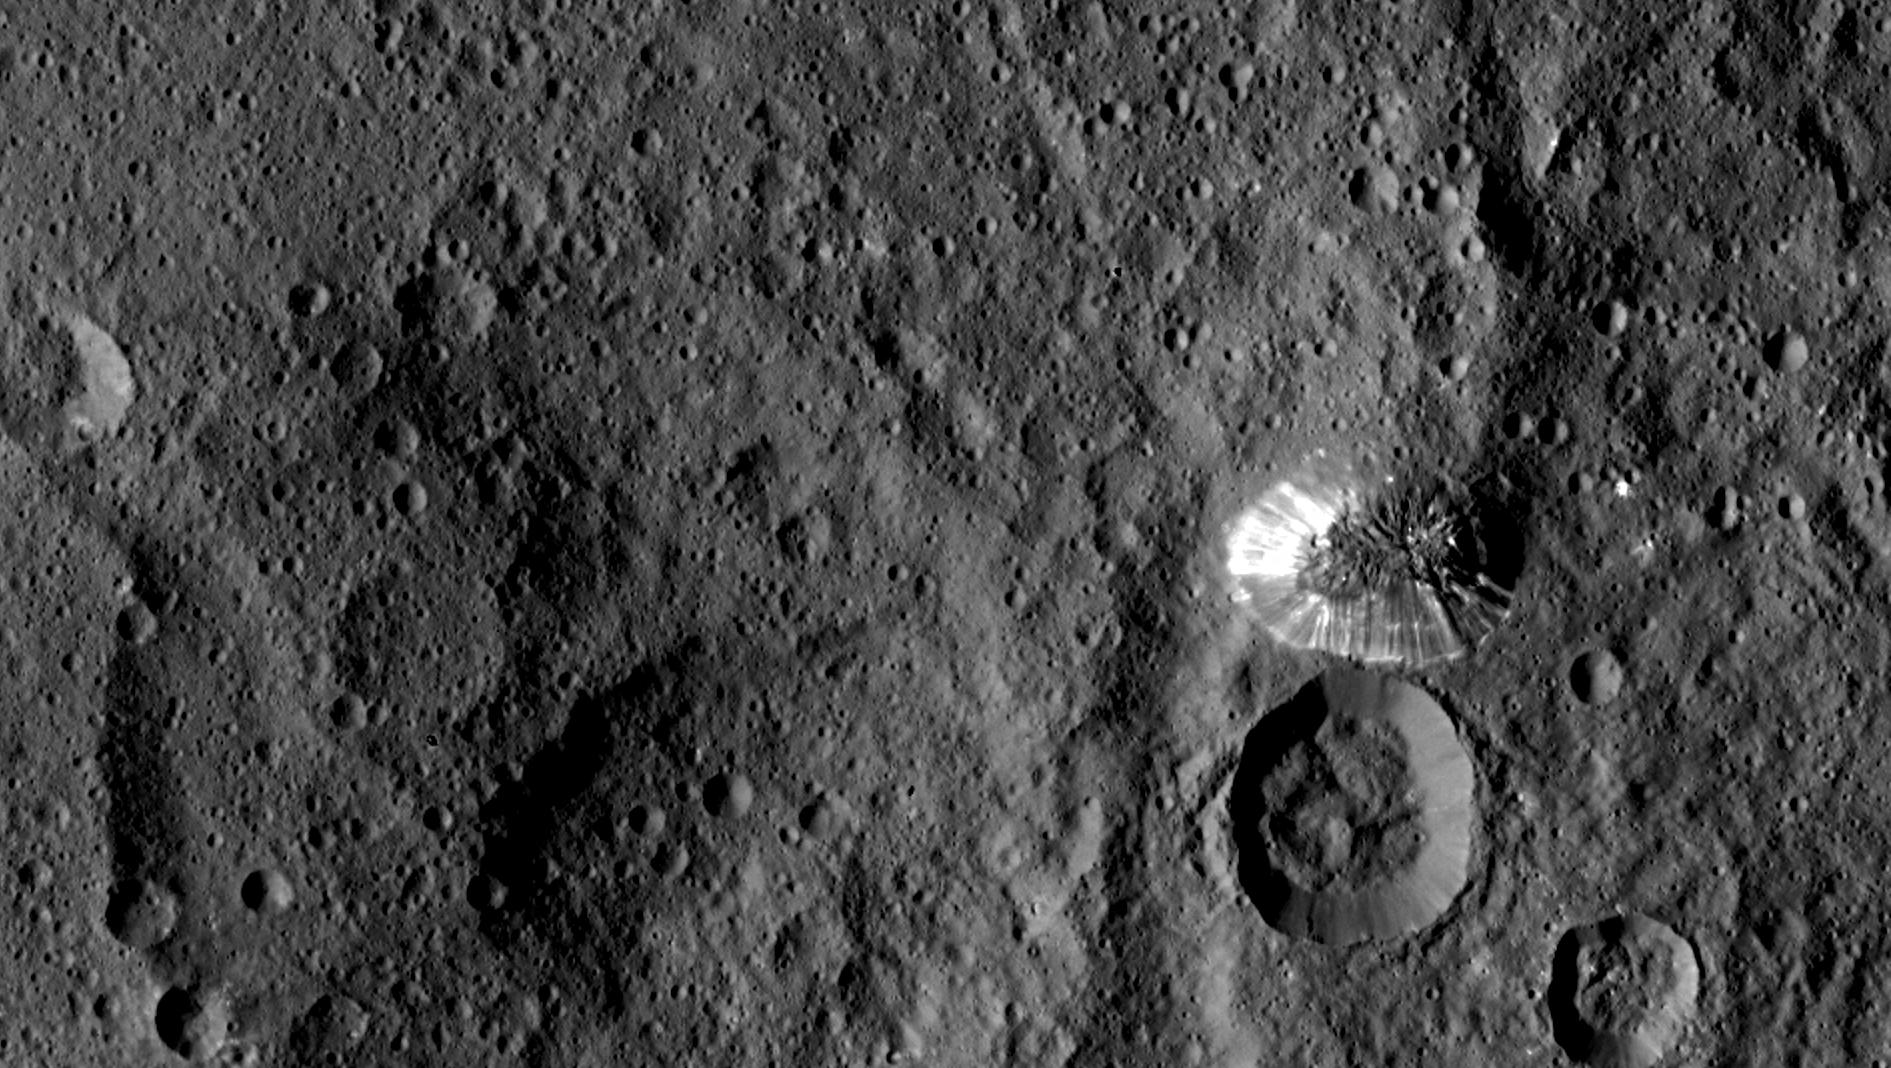 From NASA/JPL: "The Lonely Mountain The Lonely Mountain NASA's Dawn spacecraft spotted this tall, conical mountain on Ceres from a distance of 915 miles (1,470 kilometers). The mountain, located in the southern hemisphere, stands 4 miles (6 kilometers) high. Its perimeter is sharply defined, with almost no accumulated debris at the base of the brightly streaked slope." This image was taken August 19. Image Credit: NASA/JPL-Caltech/UCLA/MPS/DLR/IDA